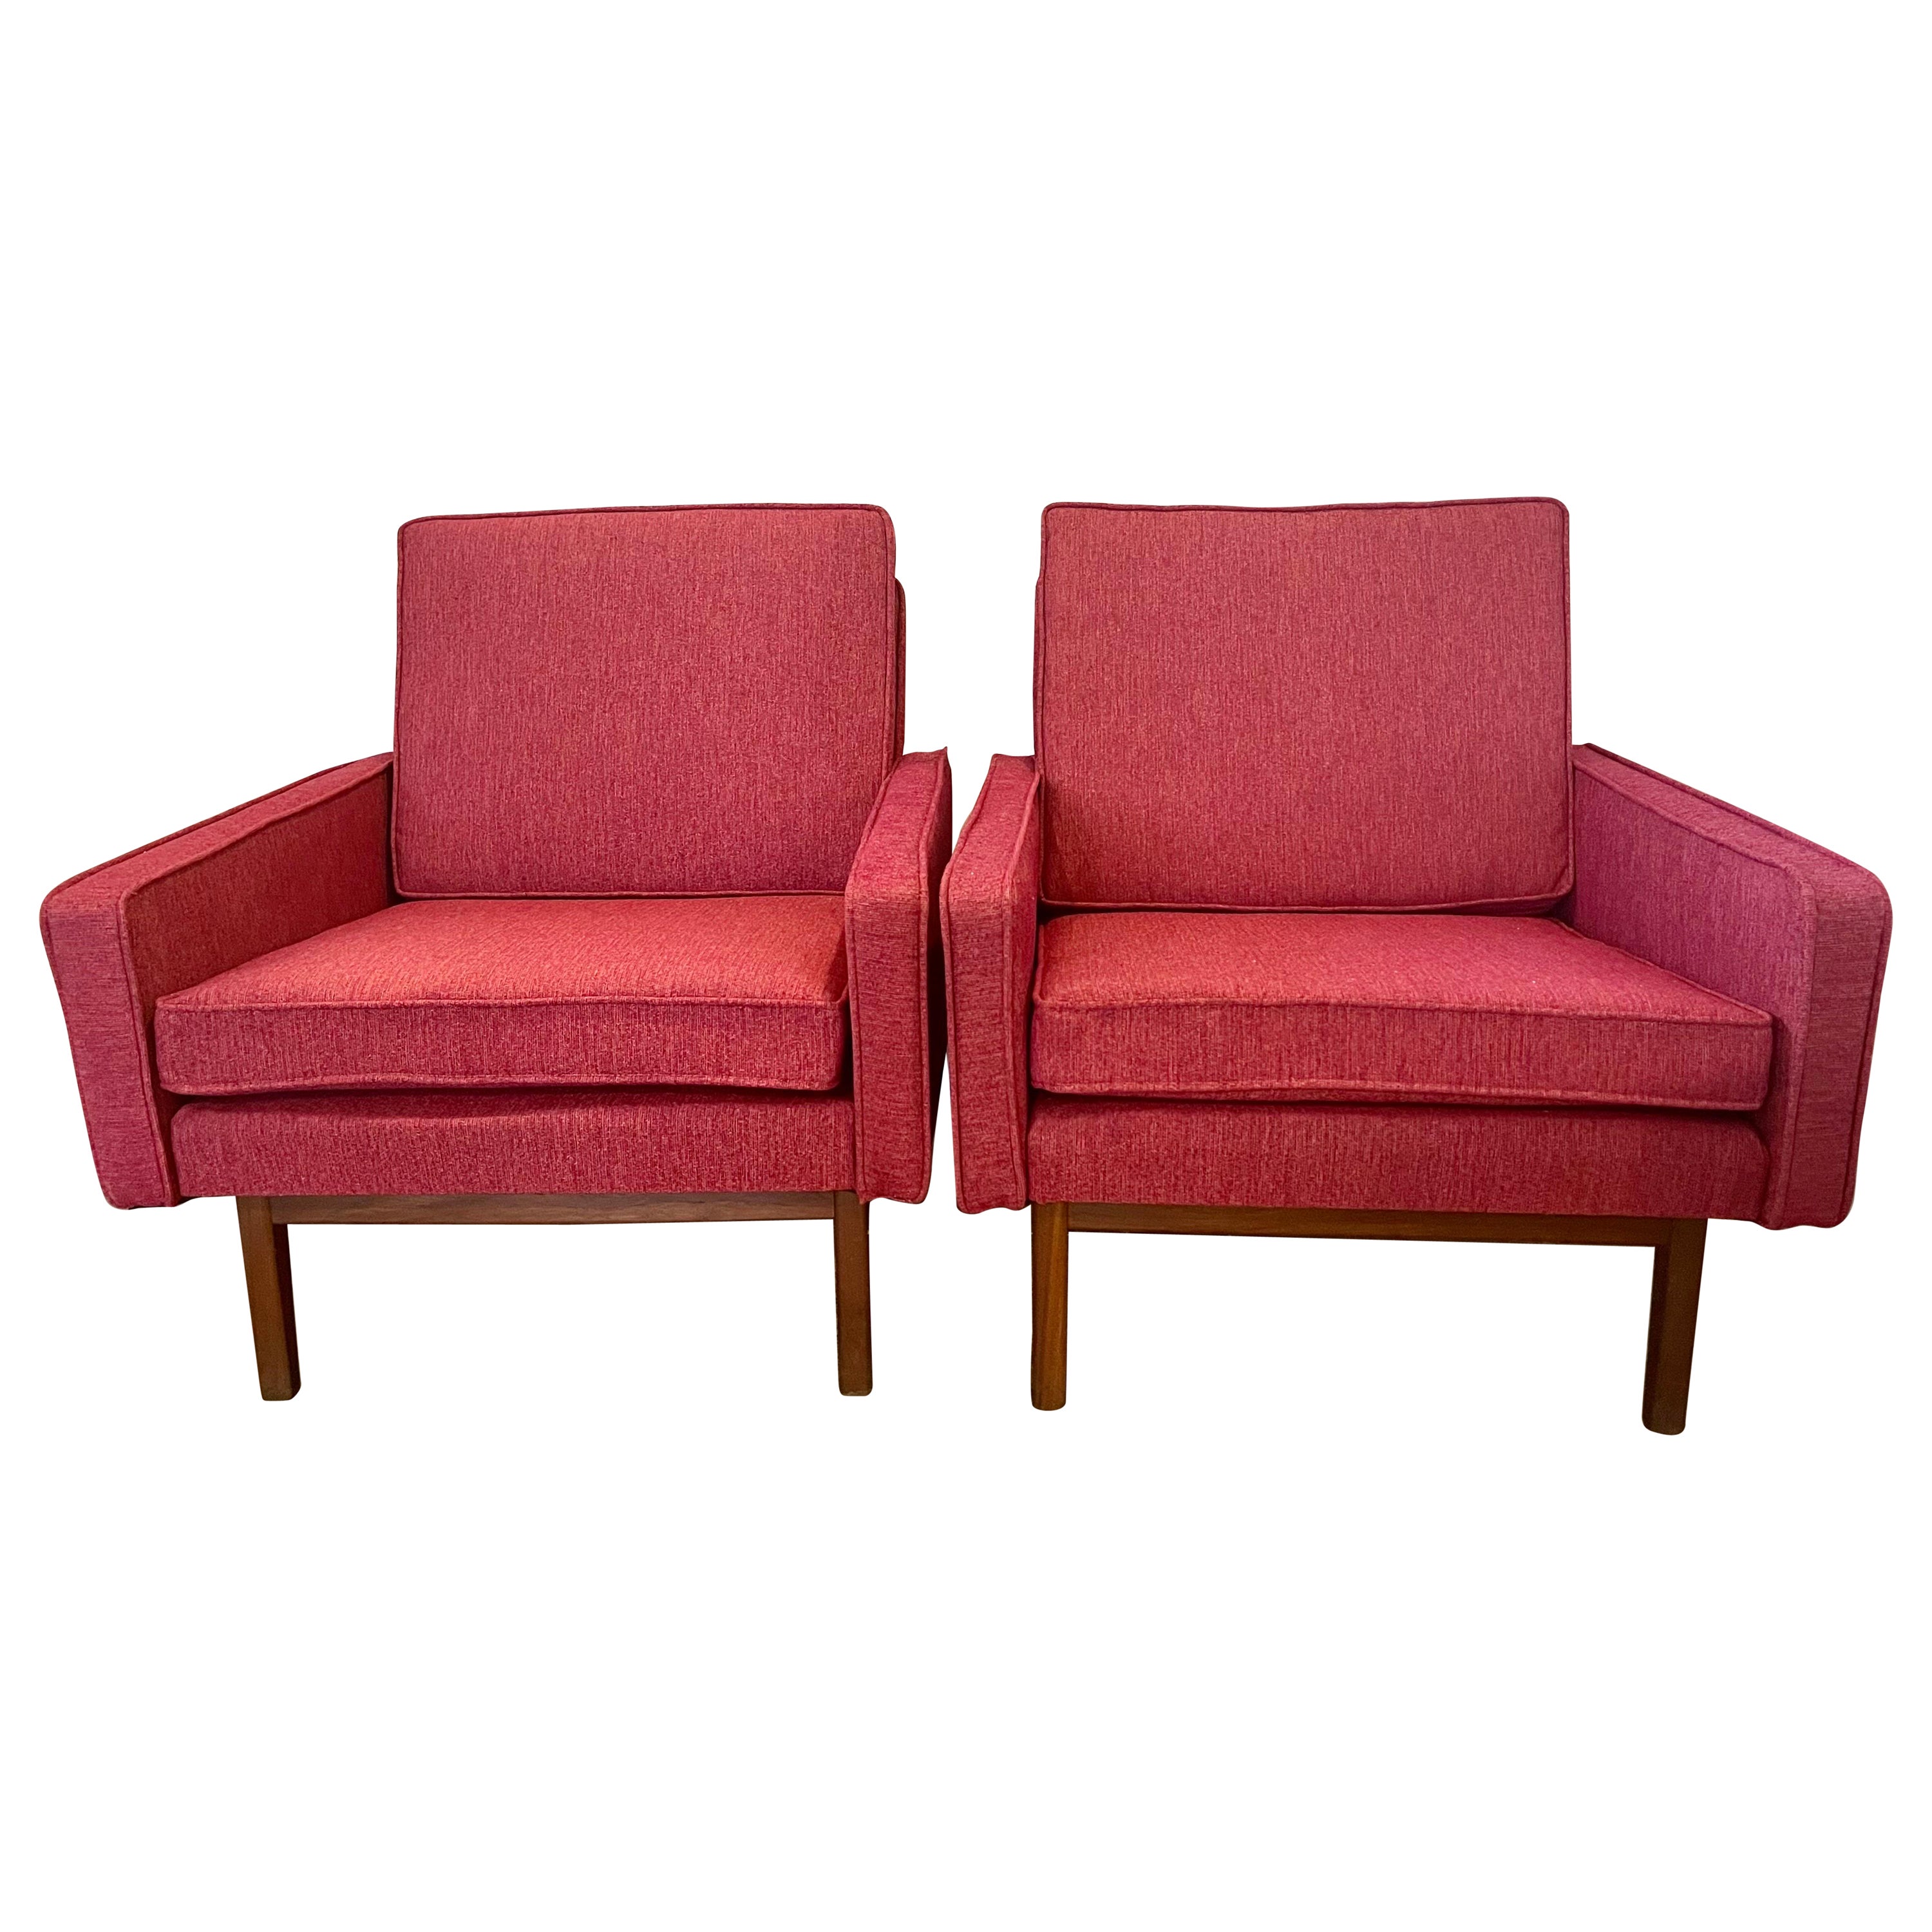 Pair of Matching Jack Cartwright for Founders Lounge Chairs Newly Upholstered